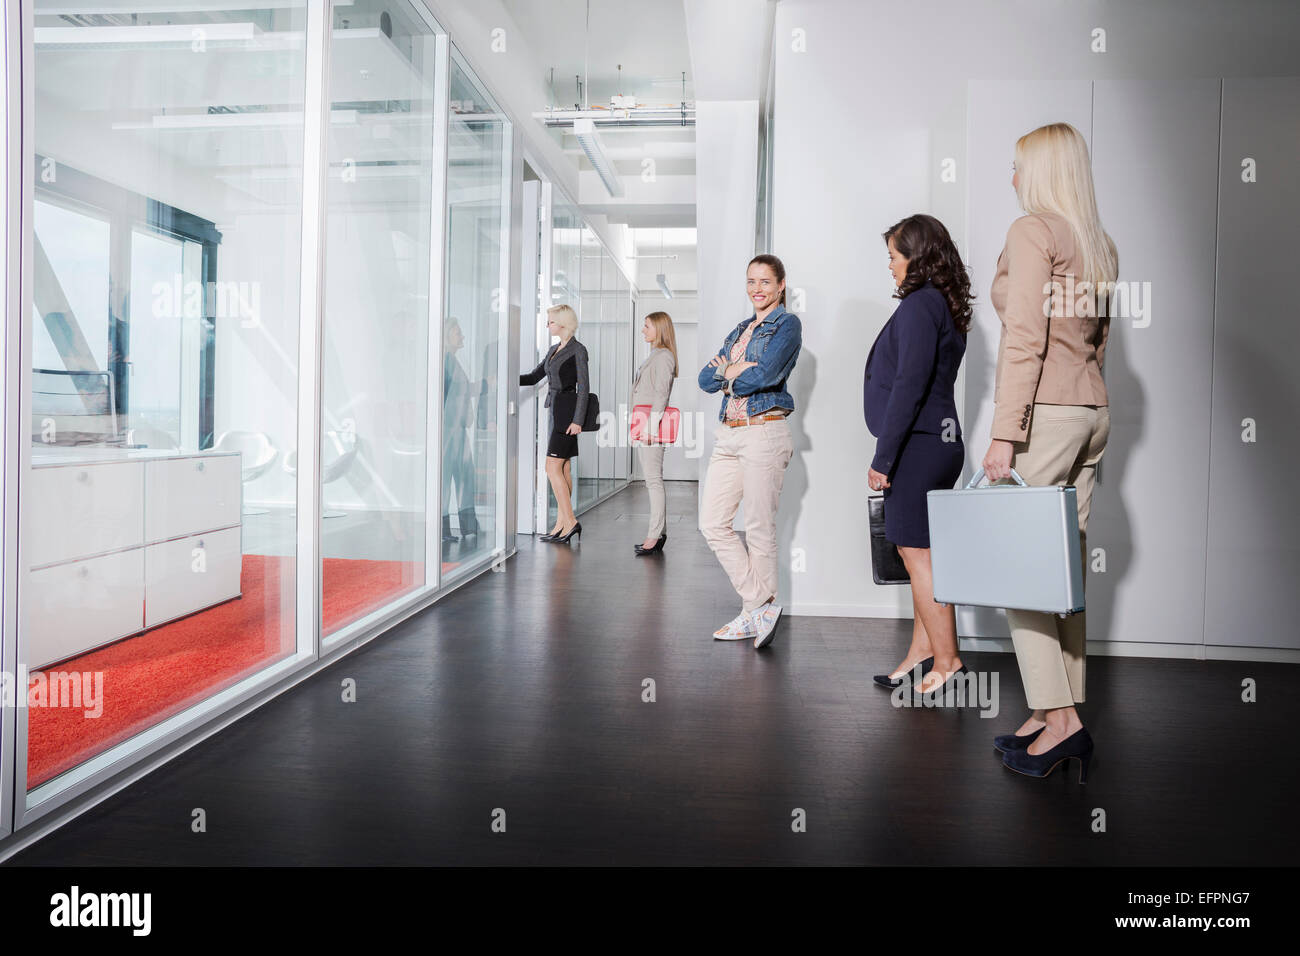 Women queueing outside interview room Stock Photo